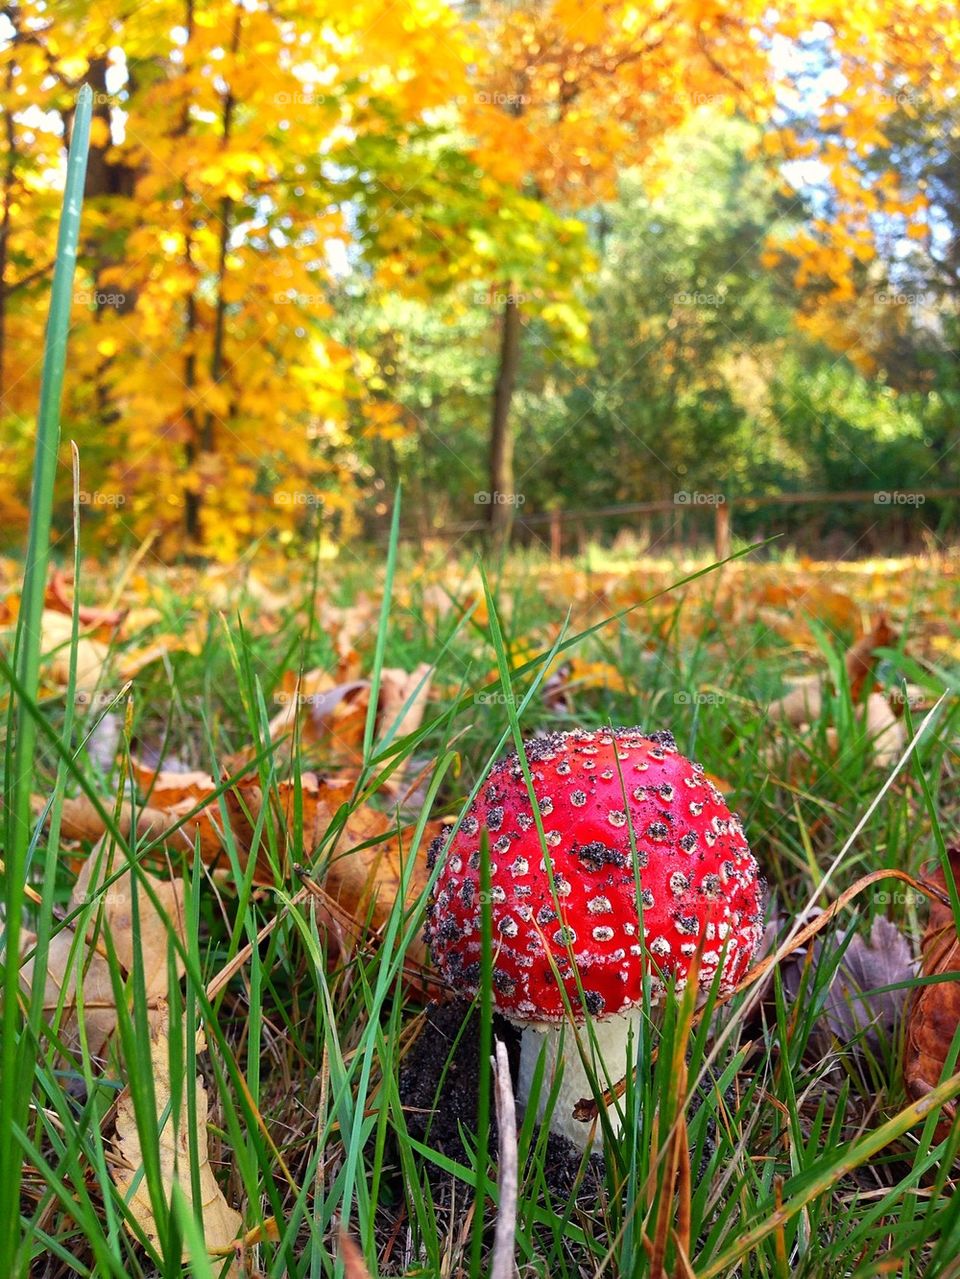 Fly agaric in autumn scenery